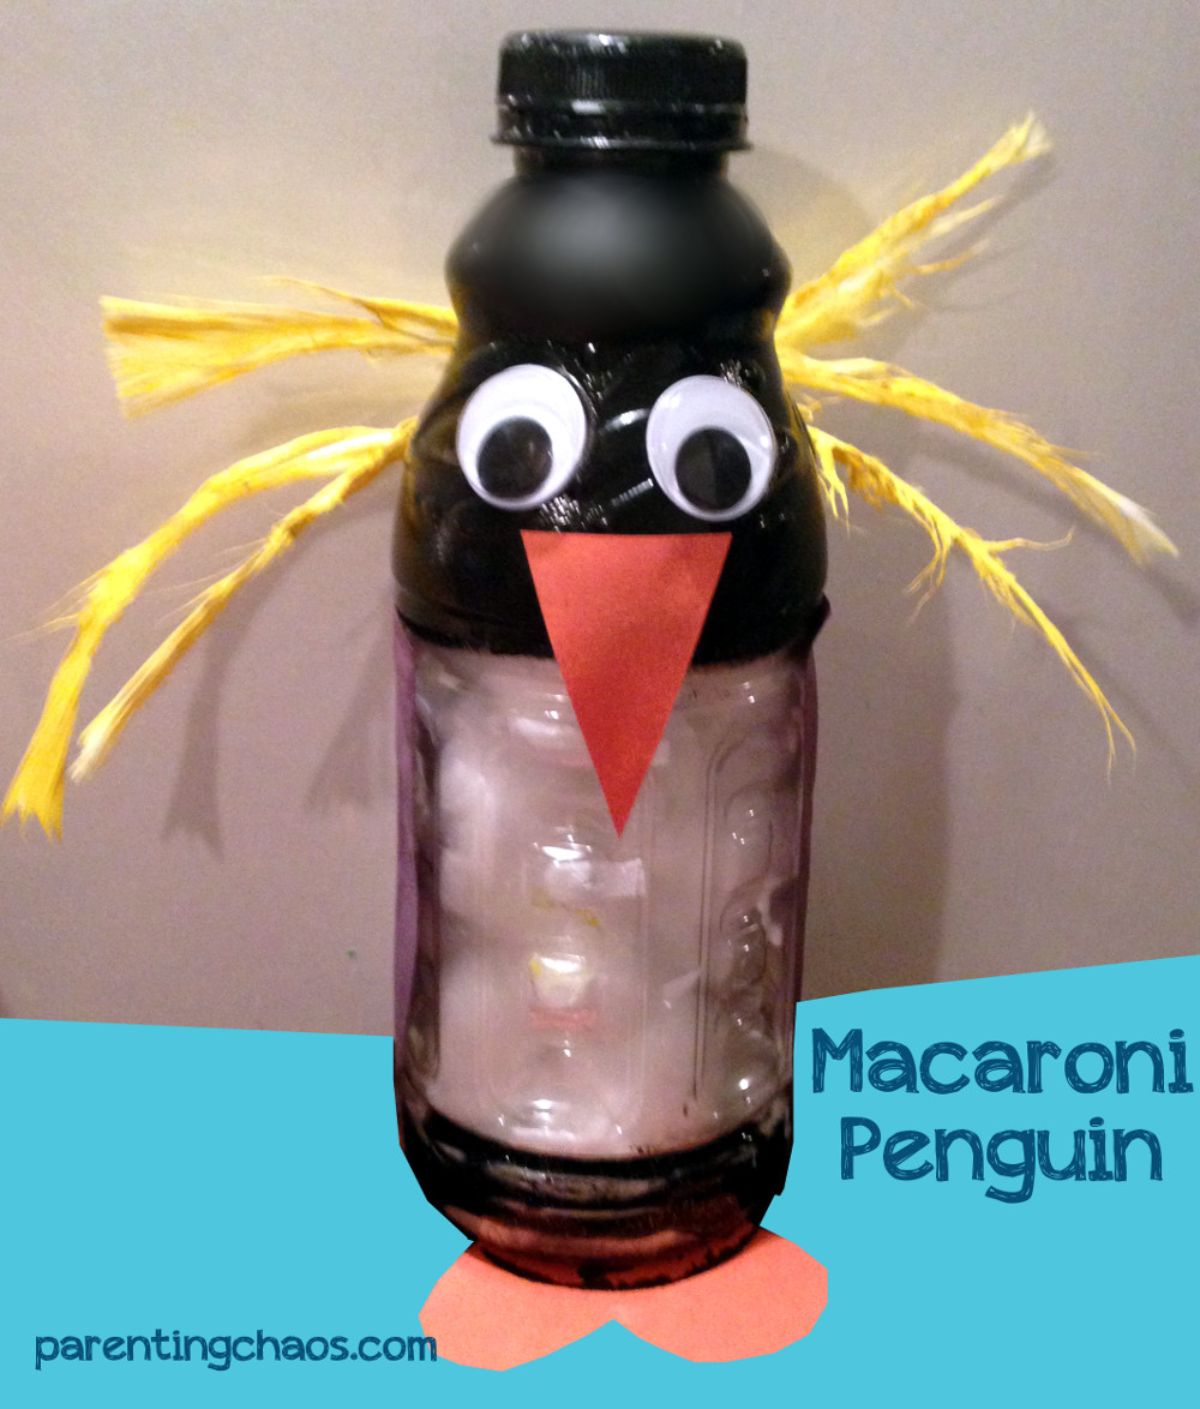 The text reads "Macaroni Penguin" the image is of a water bottles painted black, with googly eyes, orange beak and feet and yellow string as hair